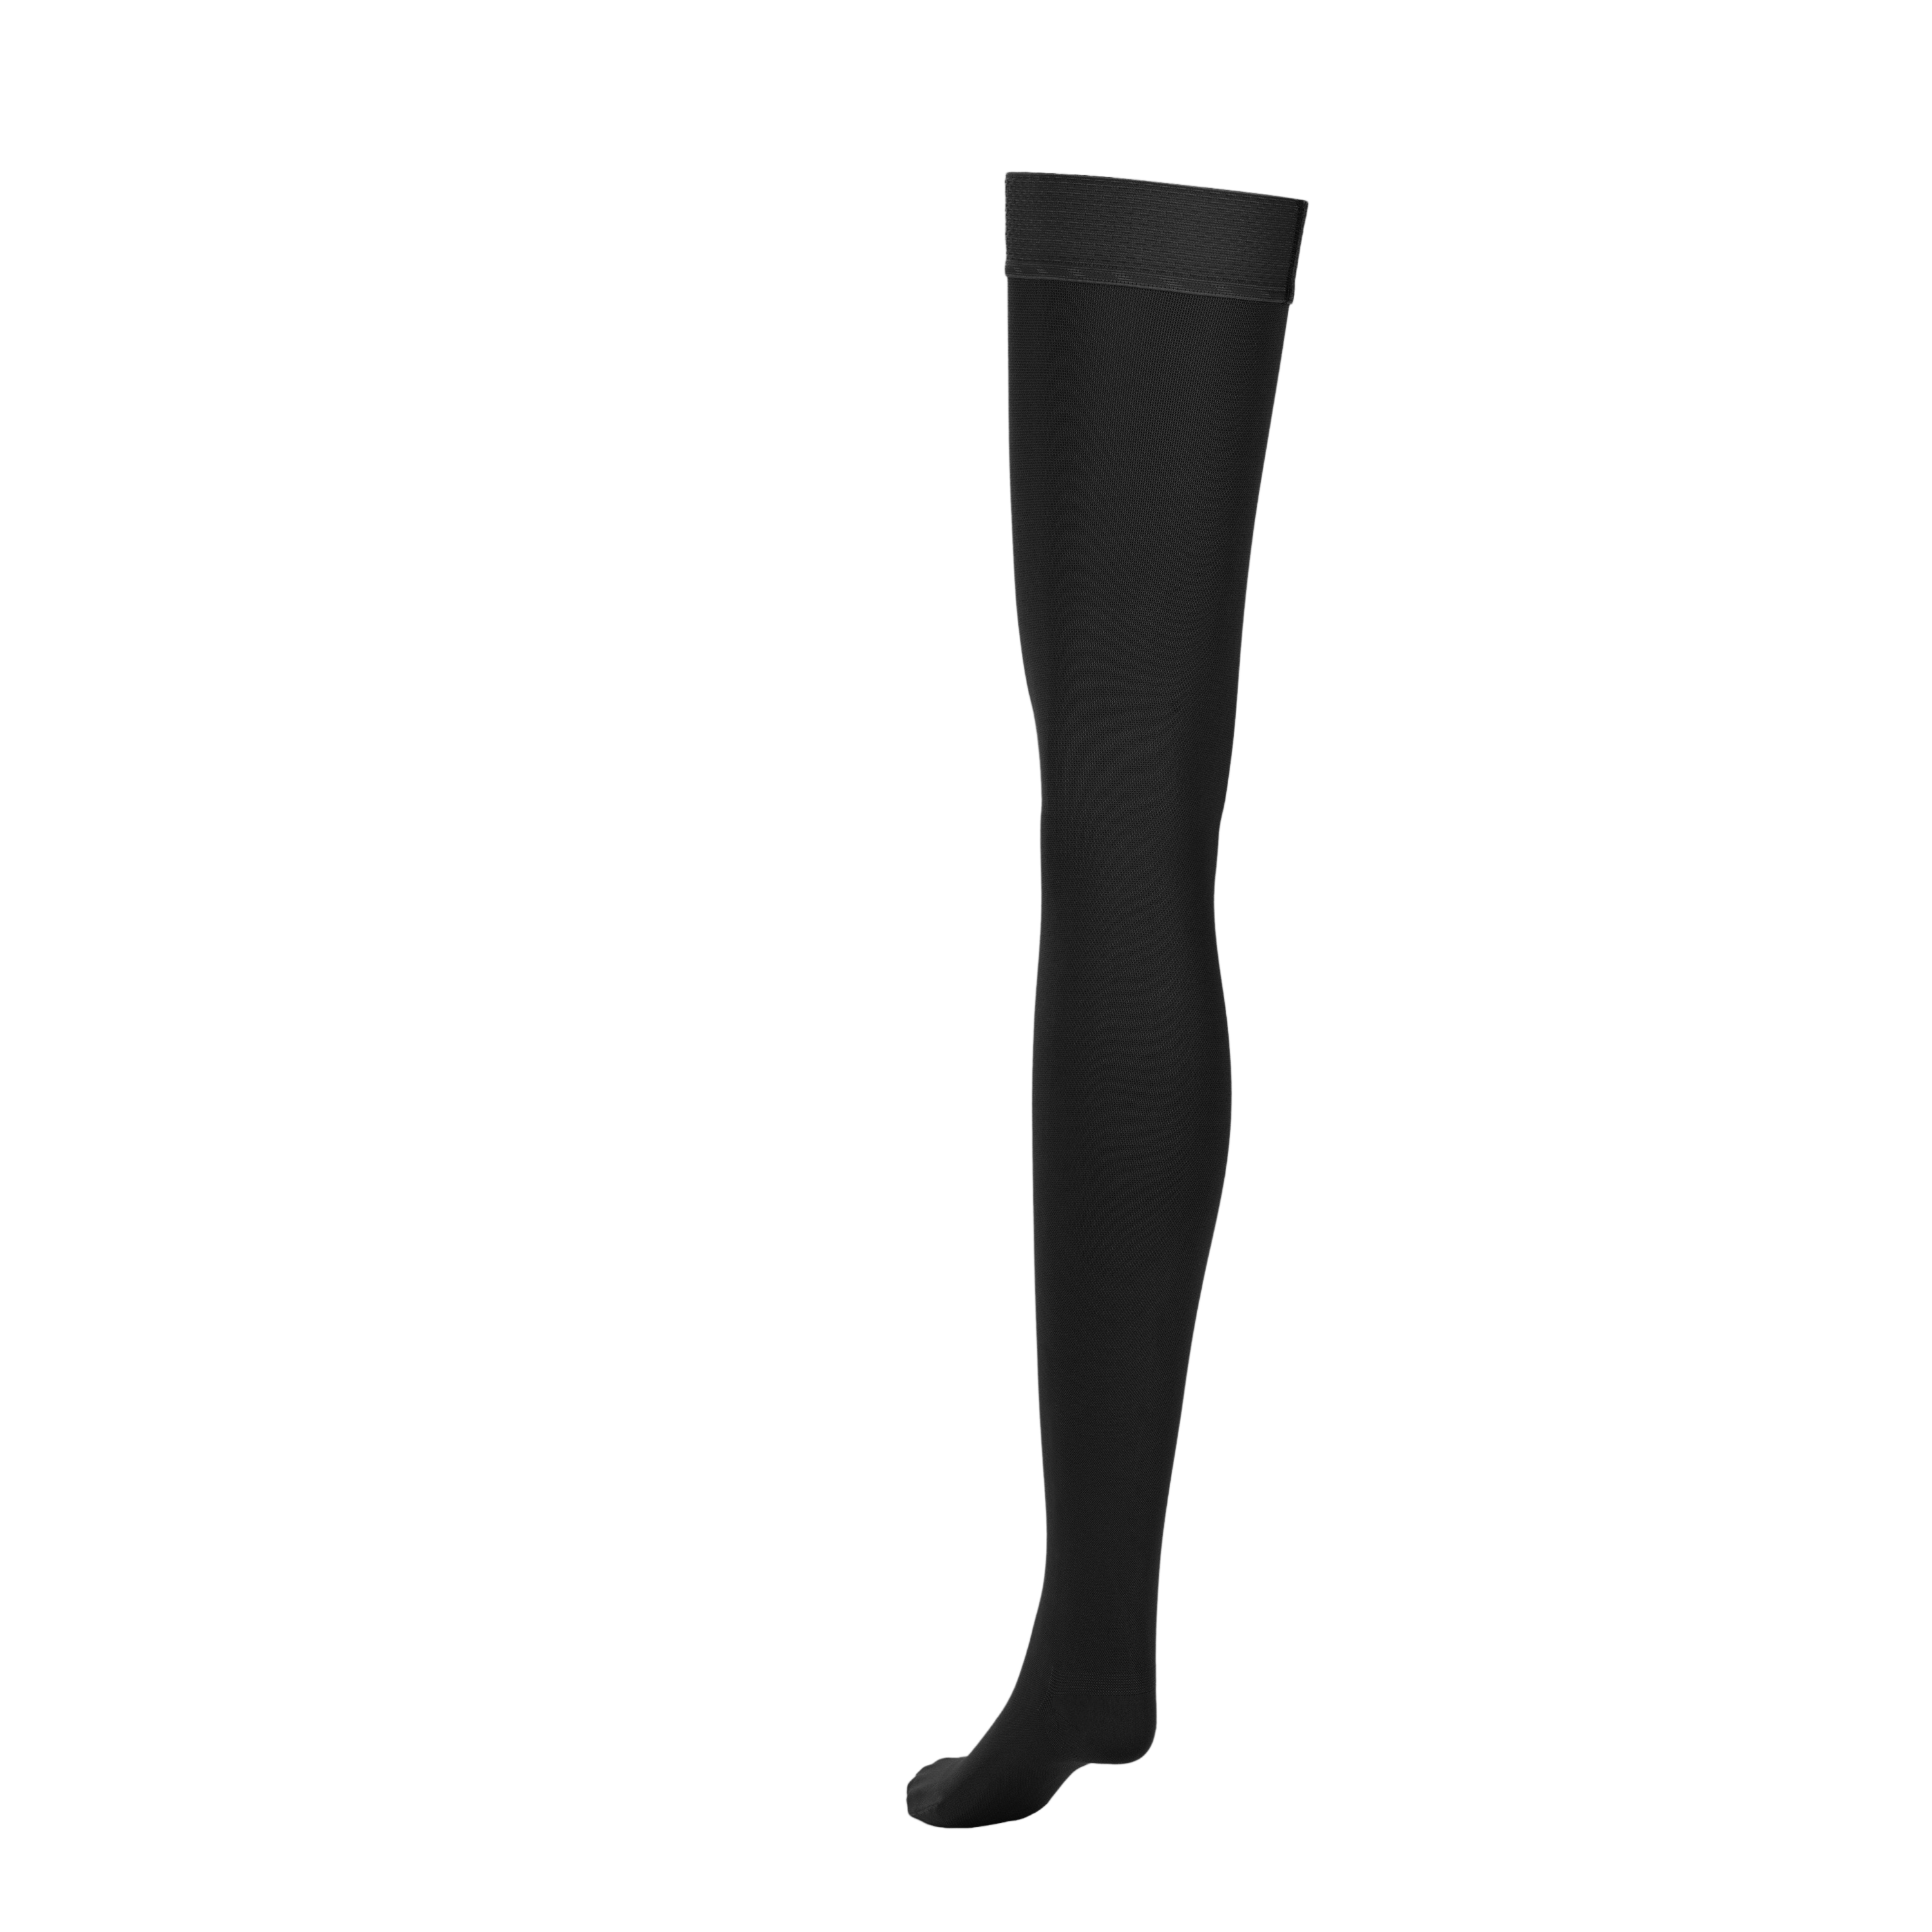 UNISEX MEDICAL GRADE Compression 15-46mmhg, Stockings, Tights, for Support  £17.95 - PicClick UK